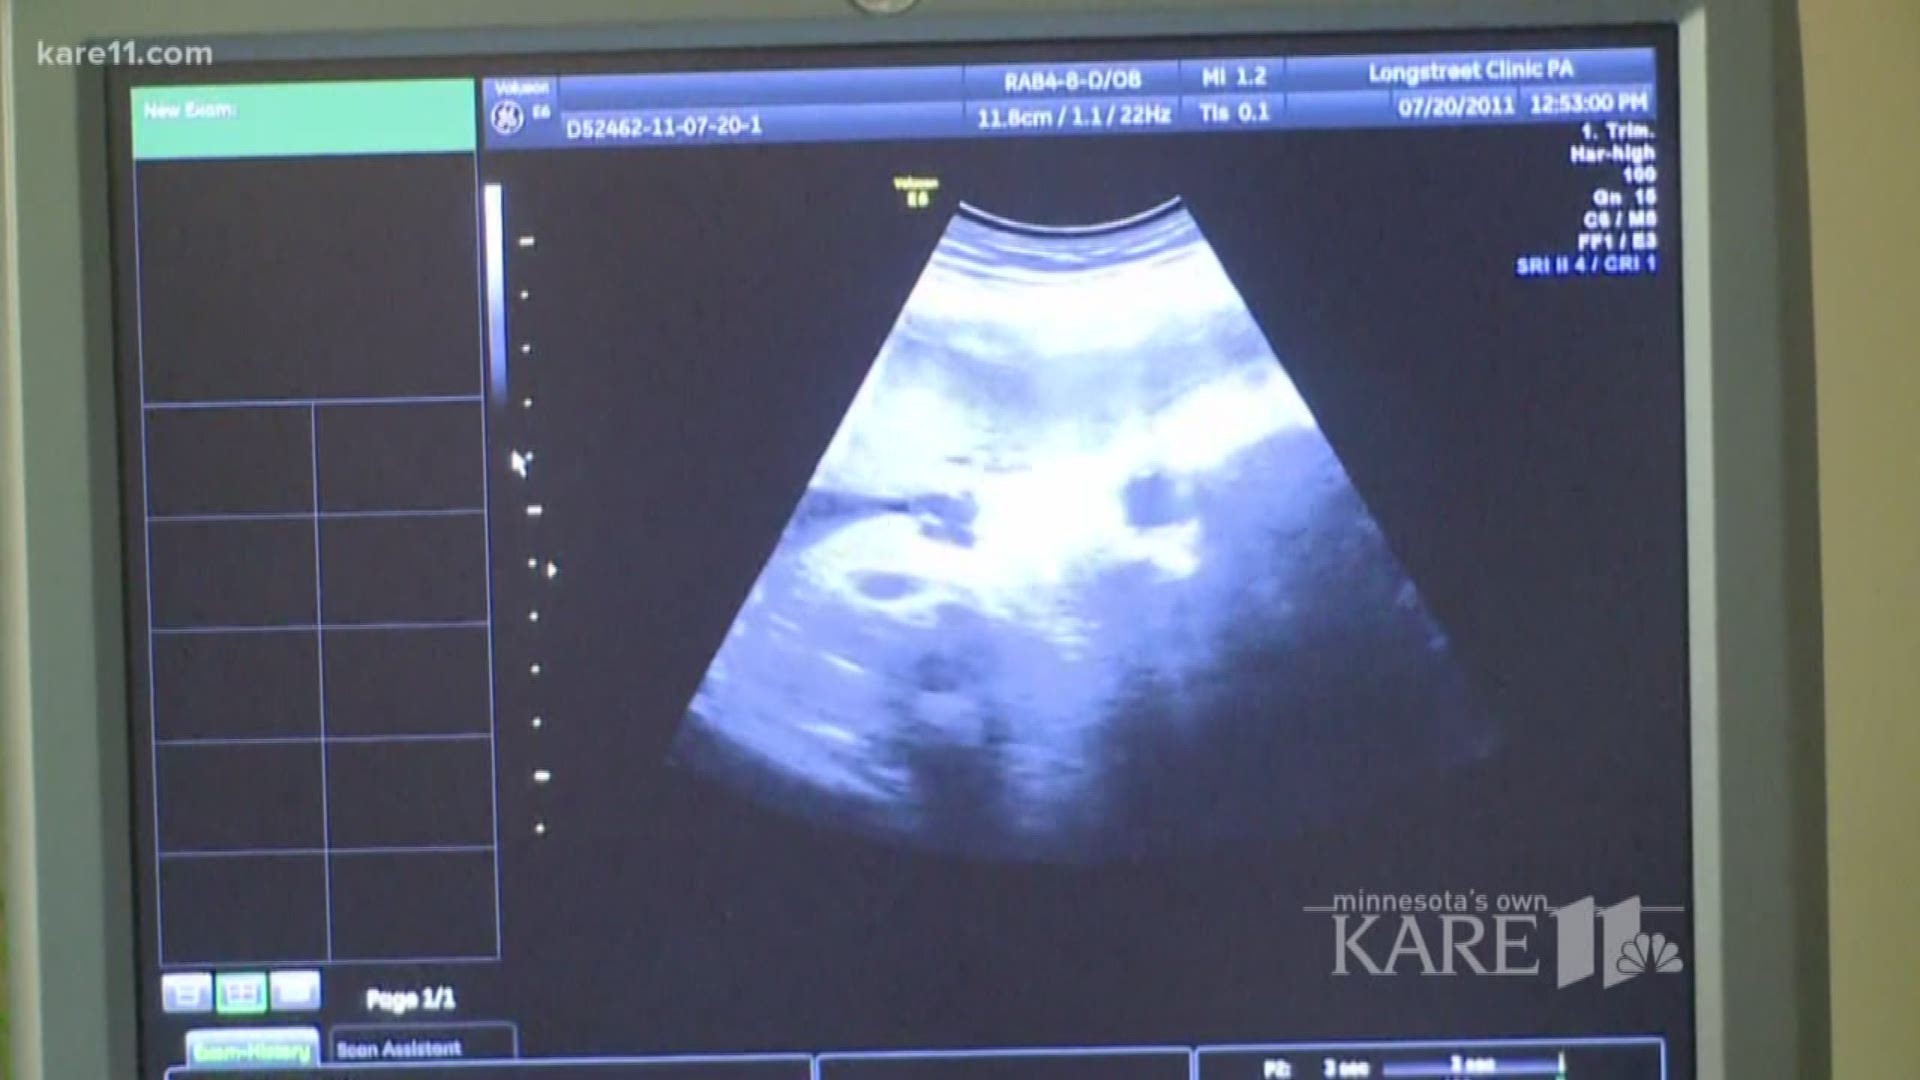 The Minnesota House Thursday passed a bill that would require physicians to tell women getting abortions that they can see the ultrasound before starting the operation.